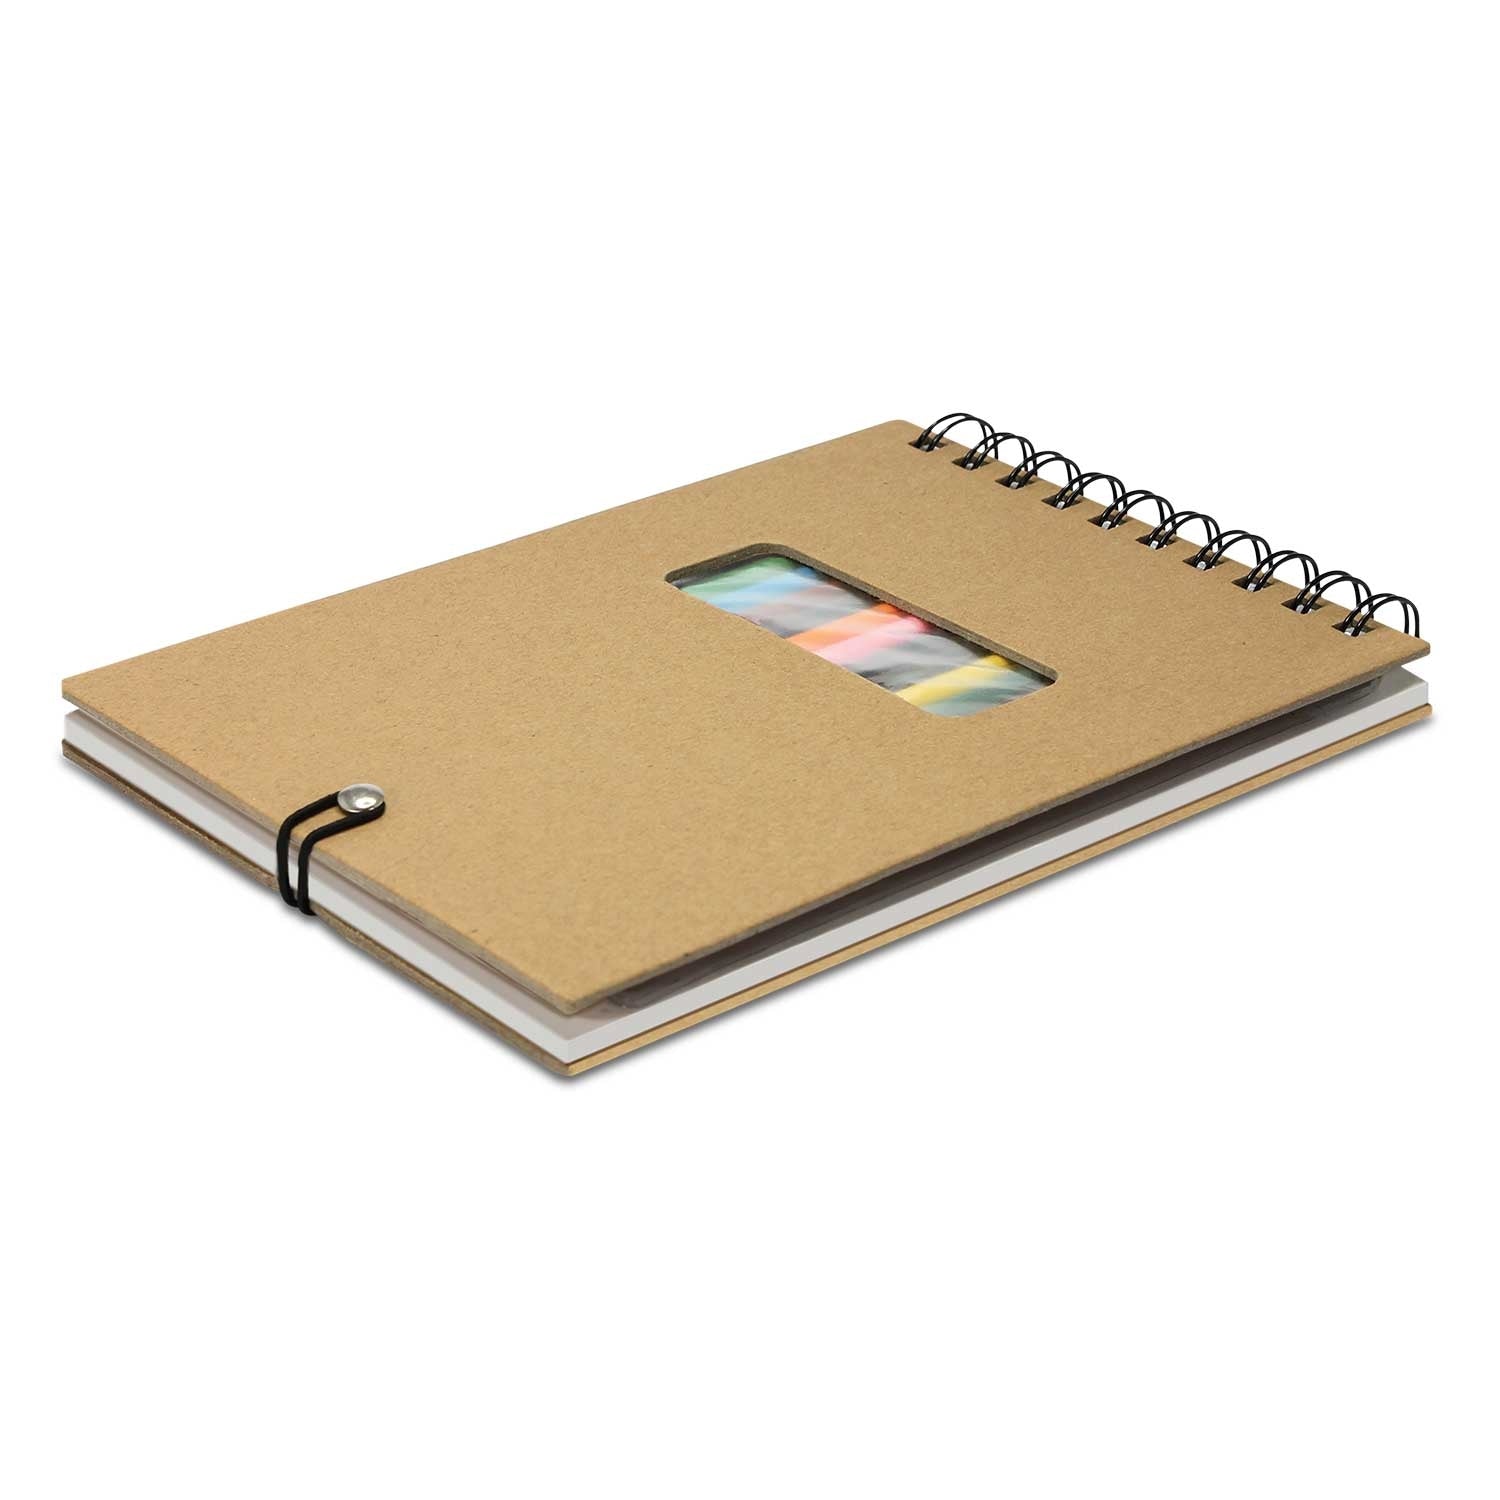 Pictorial Note Pad [113247]